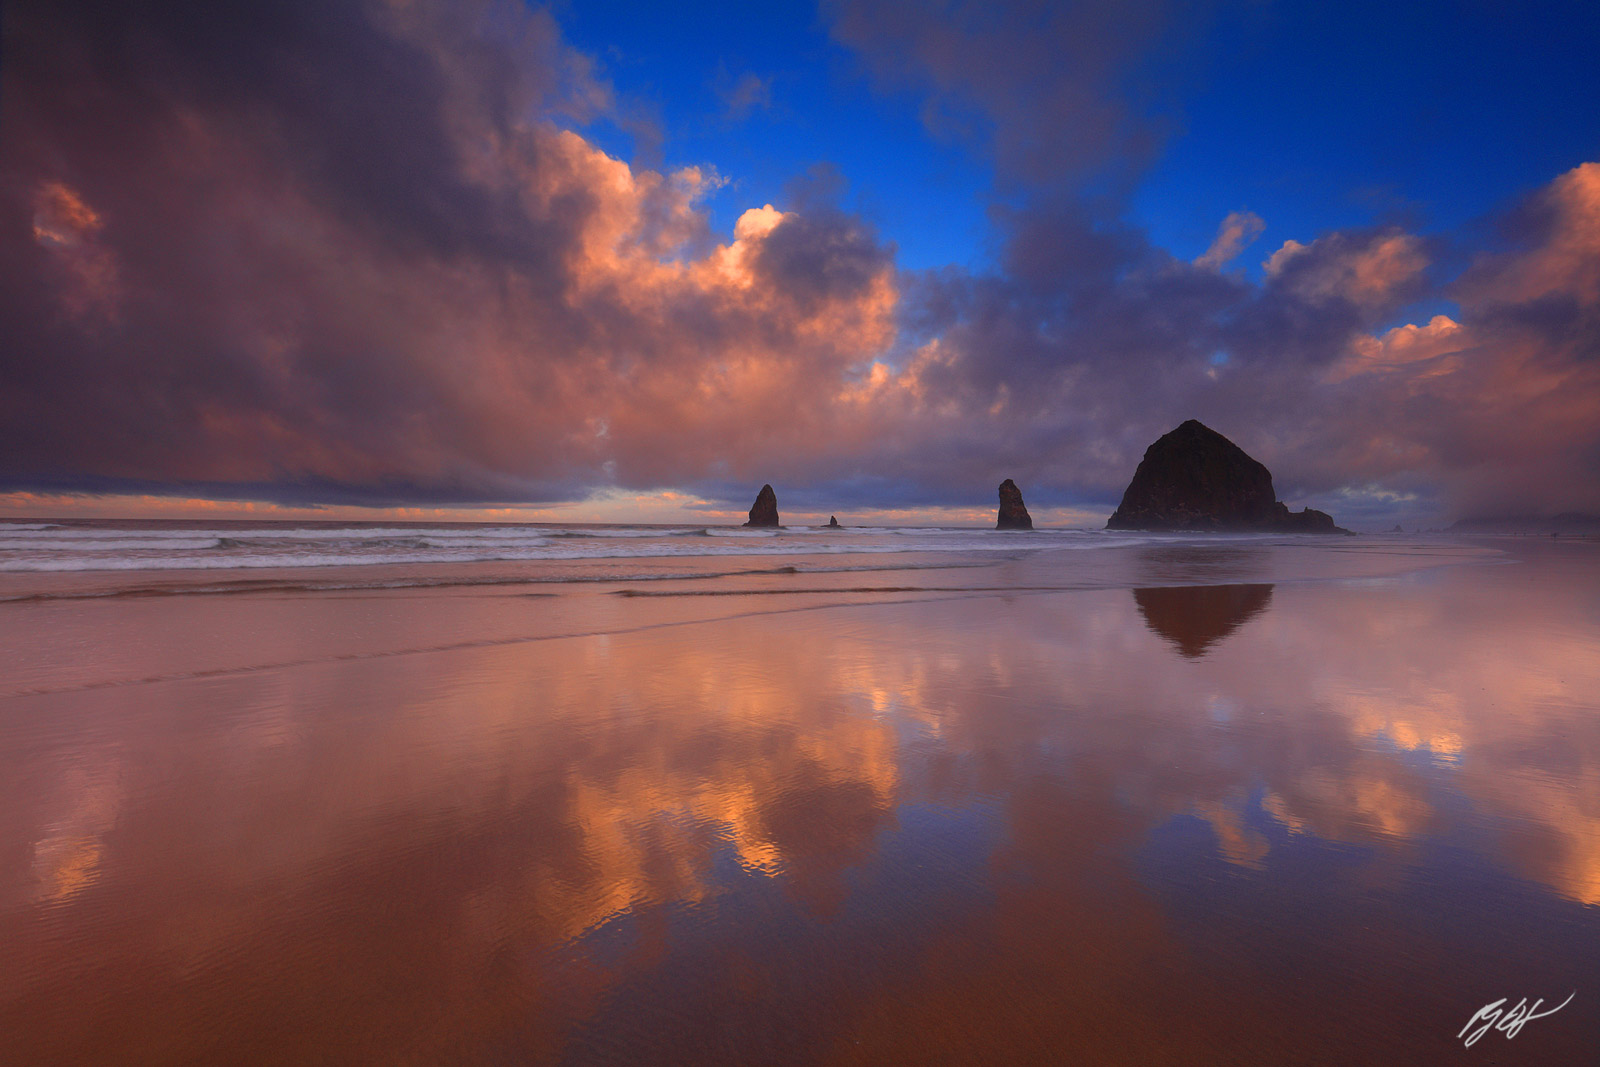 Cool Cloud Reflections and Haystack Rock and the Needles from Chapman Beach in Cannon Beach, Oregon